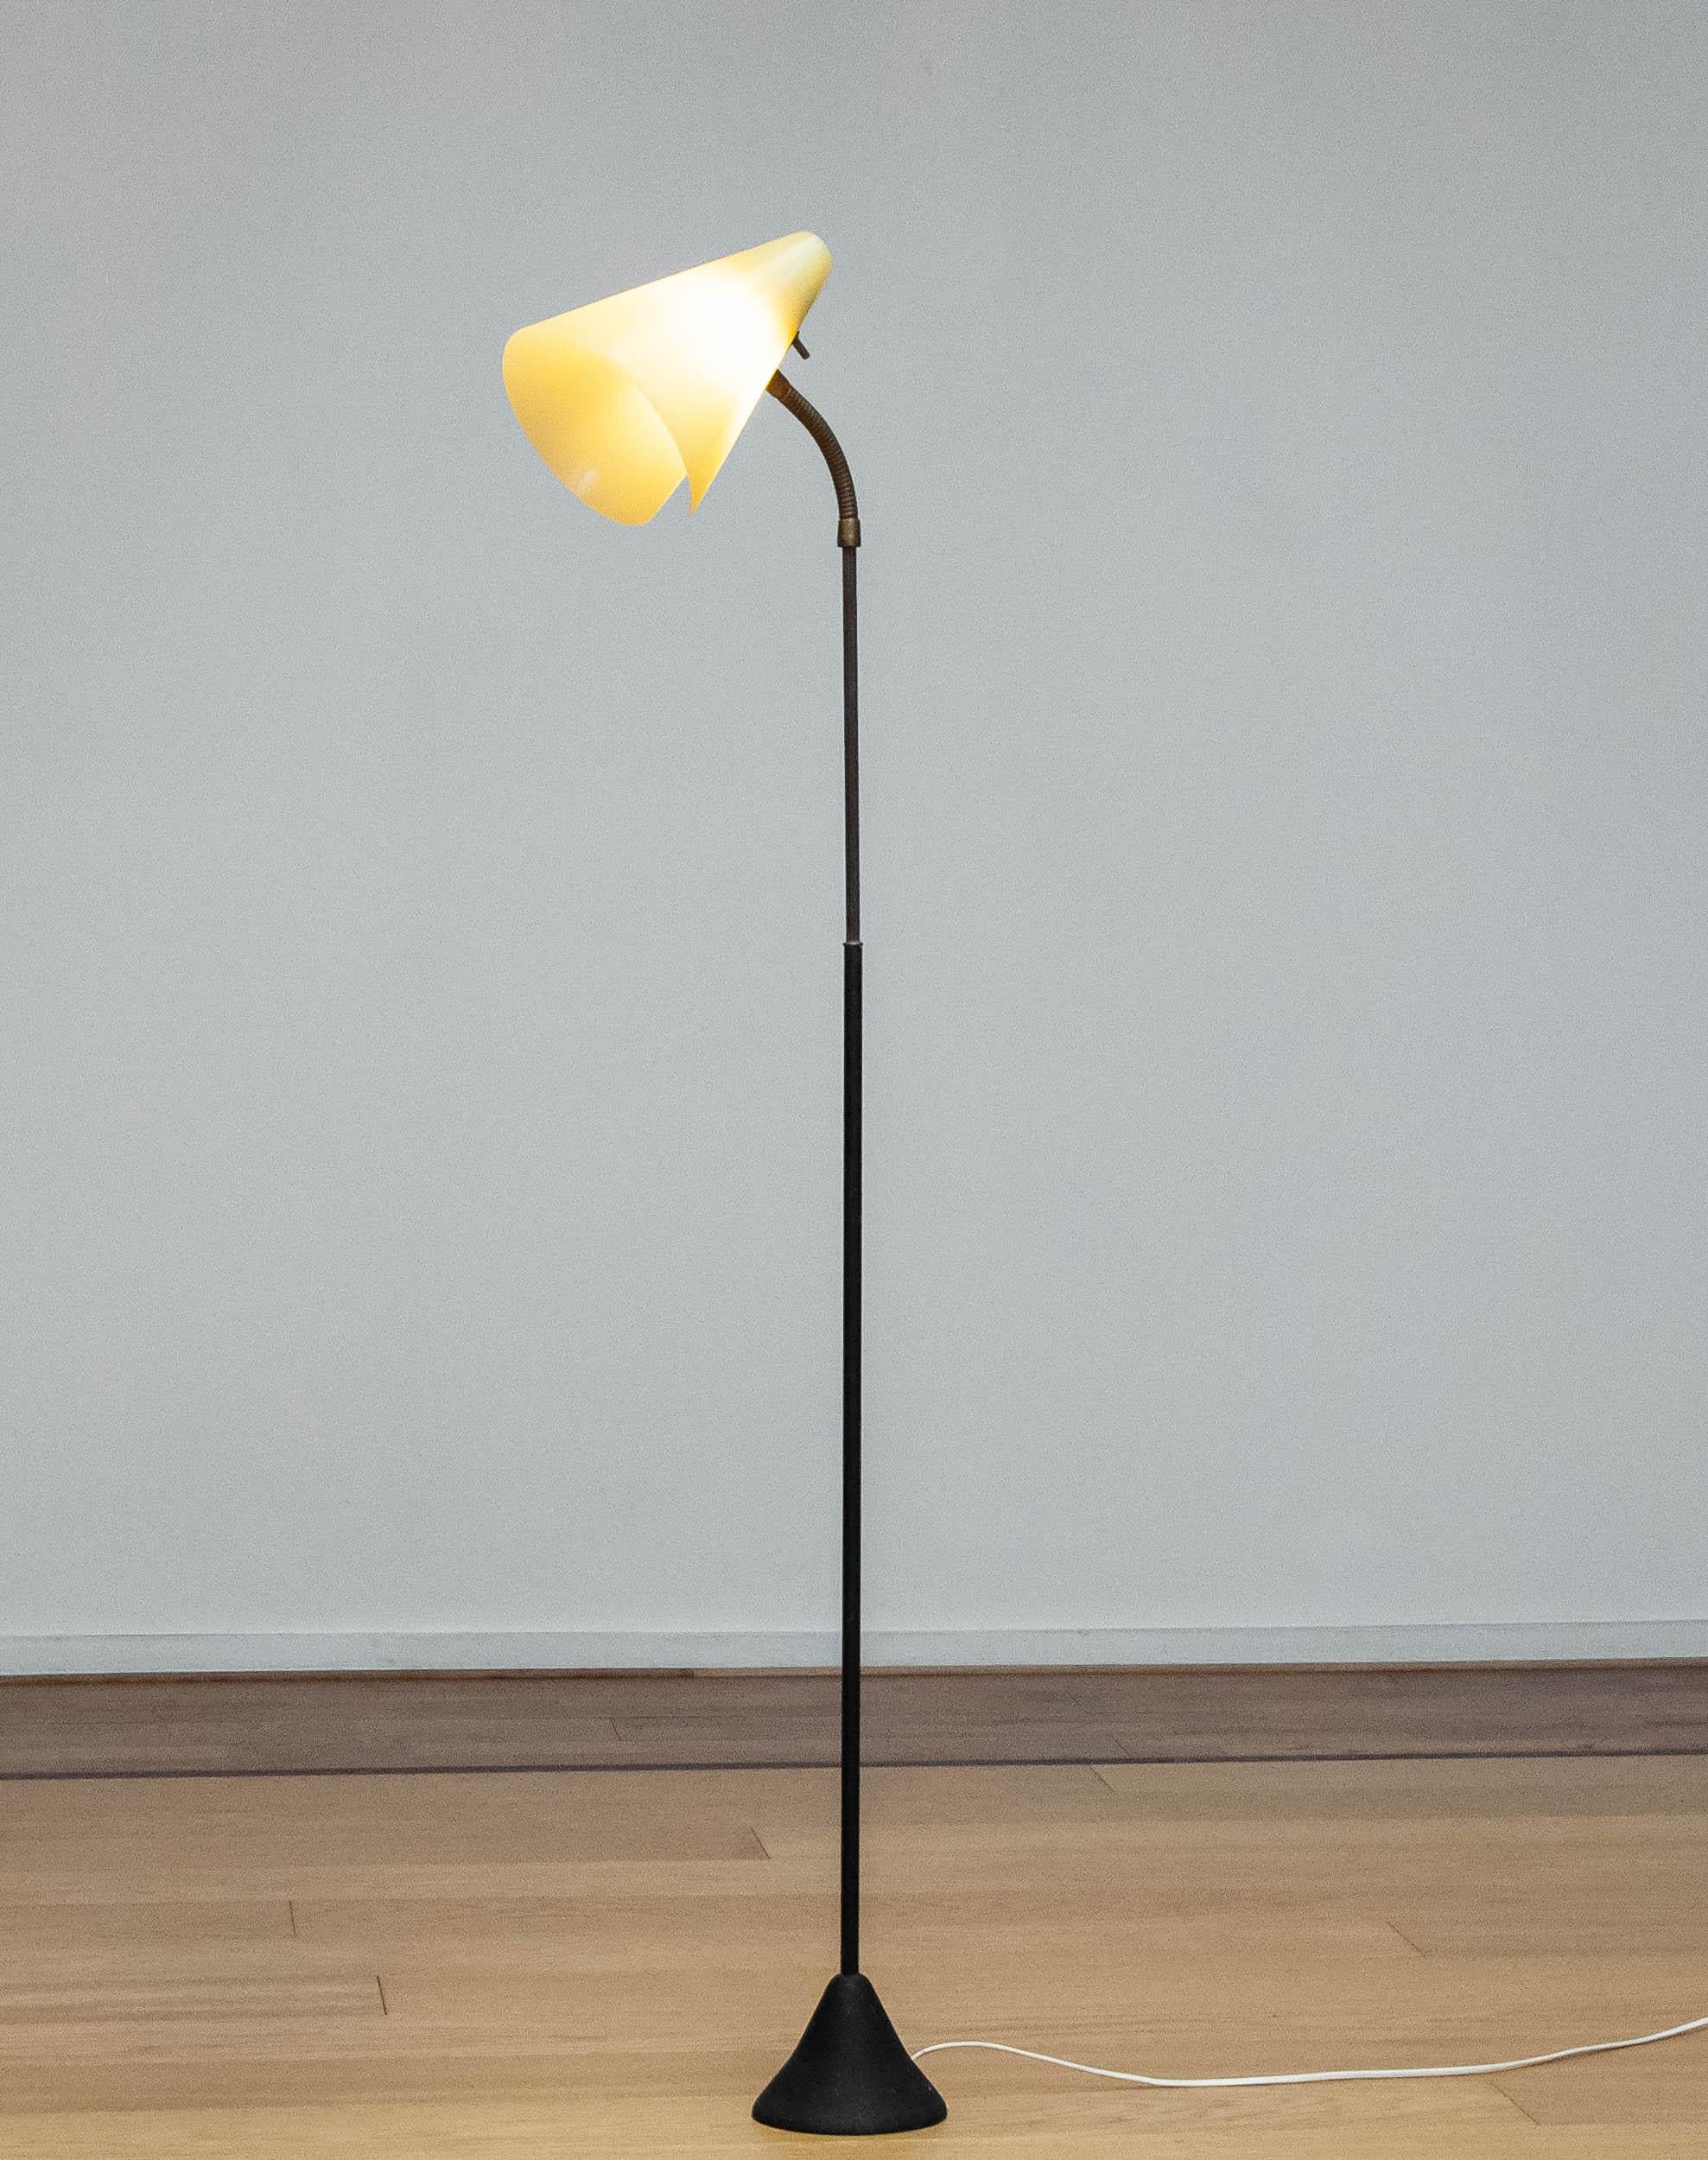 Beautiful and extremely rare slim floor lamp on trompet shape cast iron base designed by Herluf Sørensen and Jacob L. Jørgensen for their company Nordisk Solar in Denmark from the 1940s.
The acrylic shade is in perfect condition and there is NO